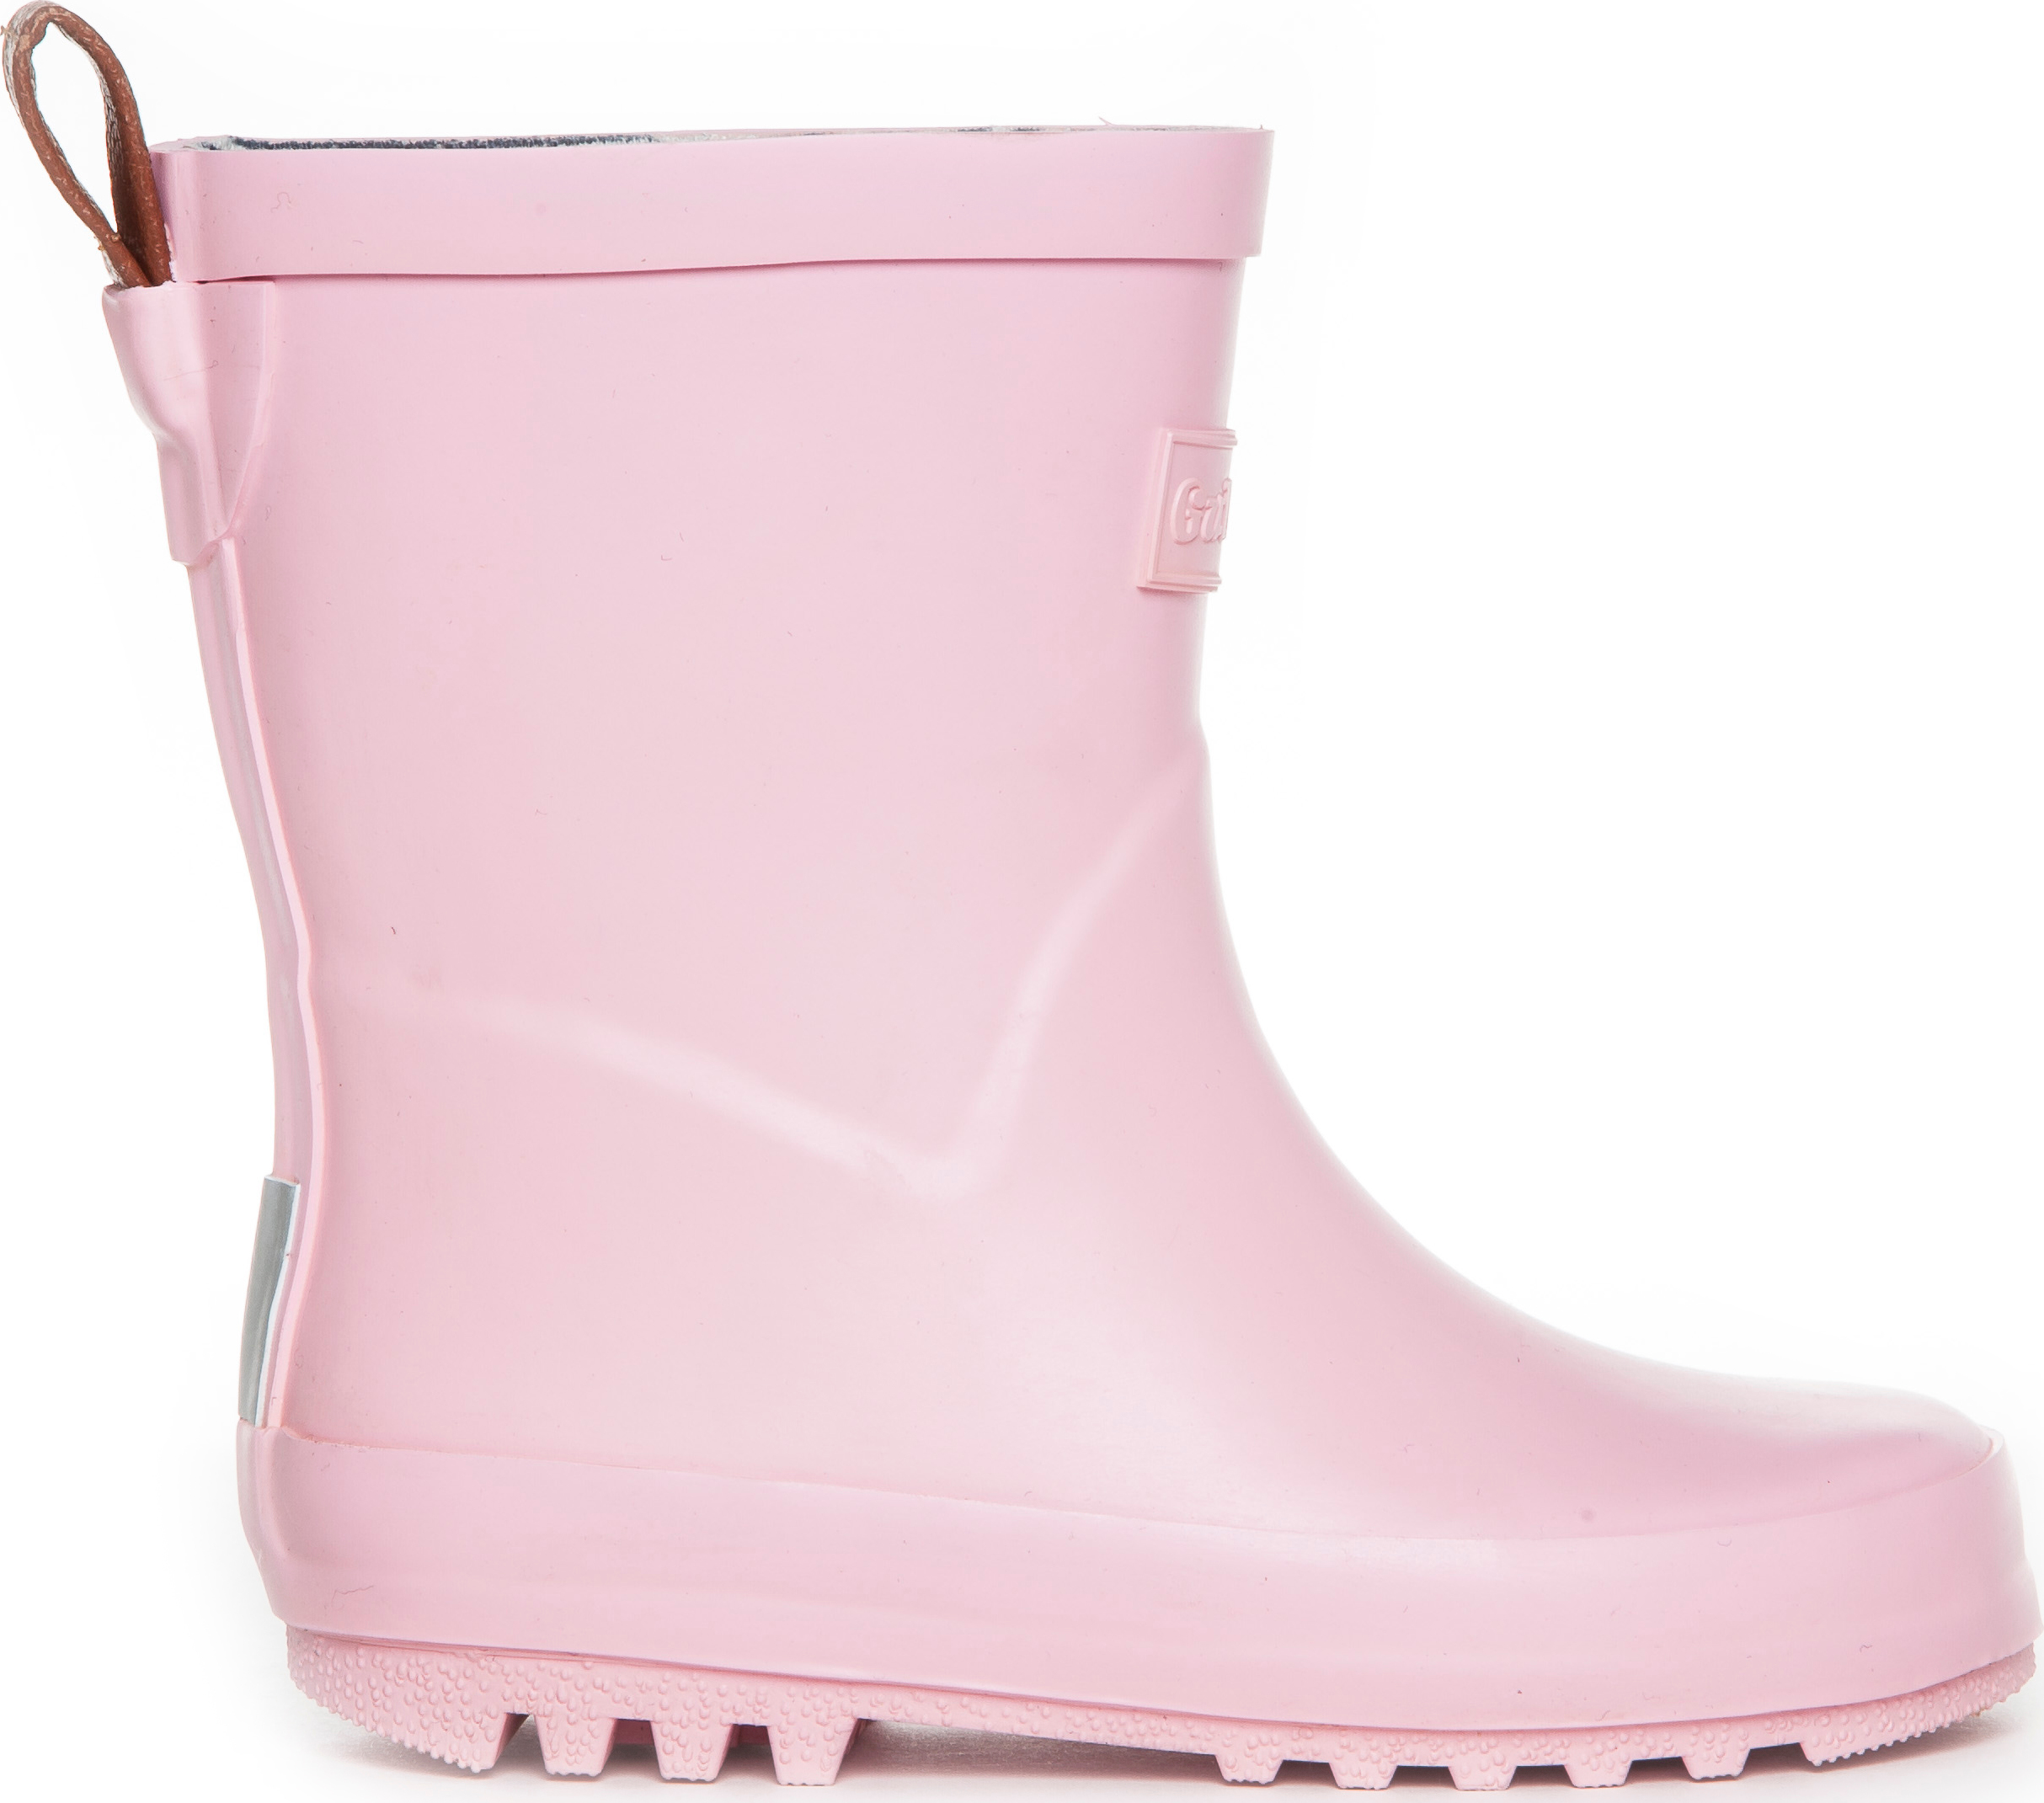 Gulliver Kids’ Rubberboots Pink